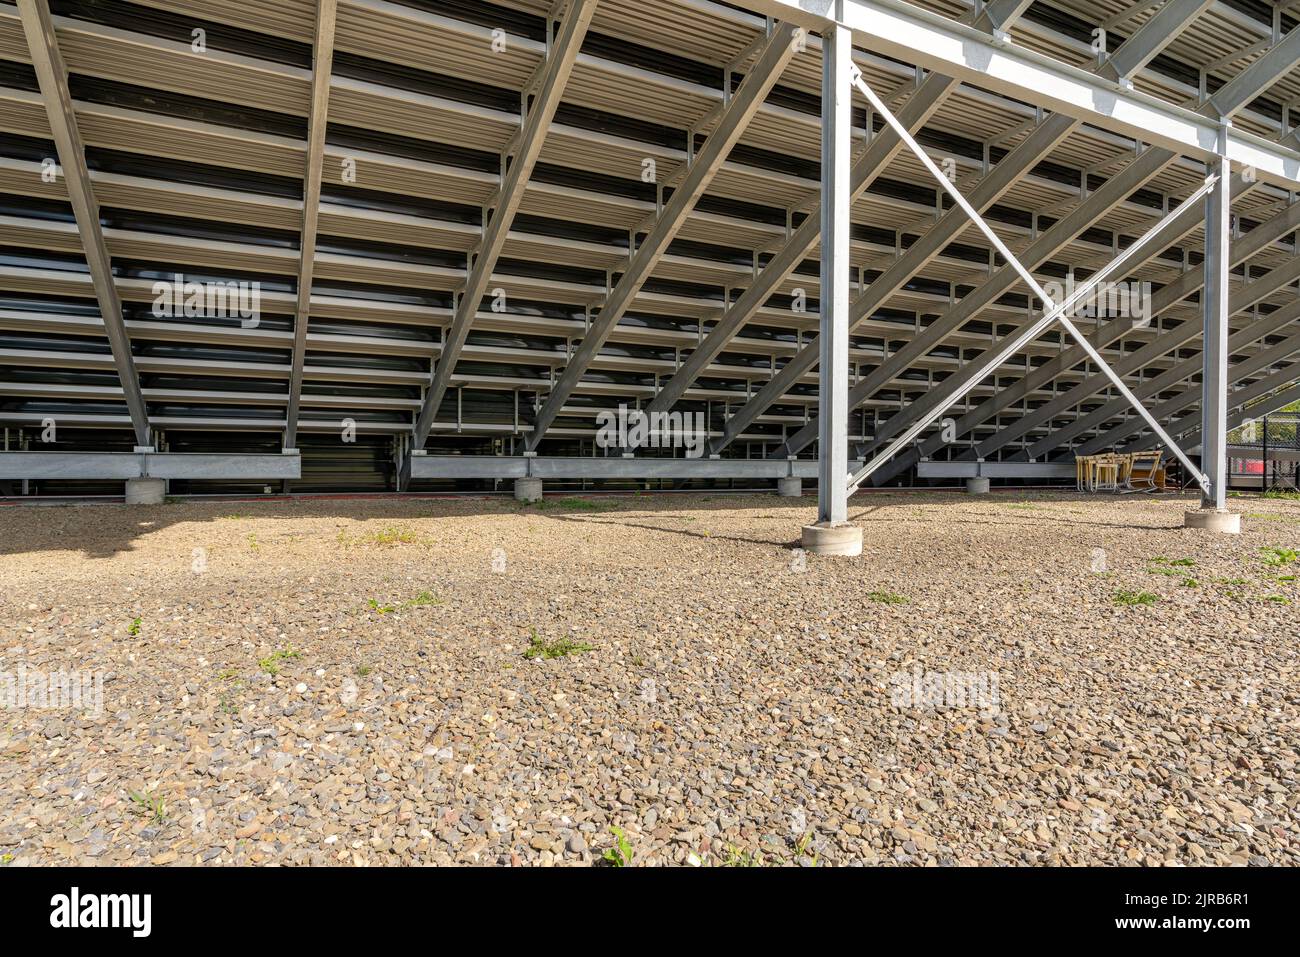 Angle view of under stadium bleachers, steal I-Beam bleachers with X cross brace, with stone surface. Stock Photo